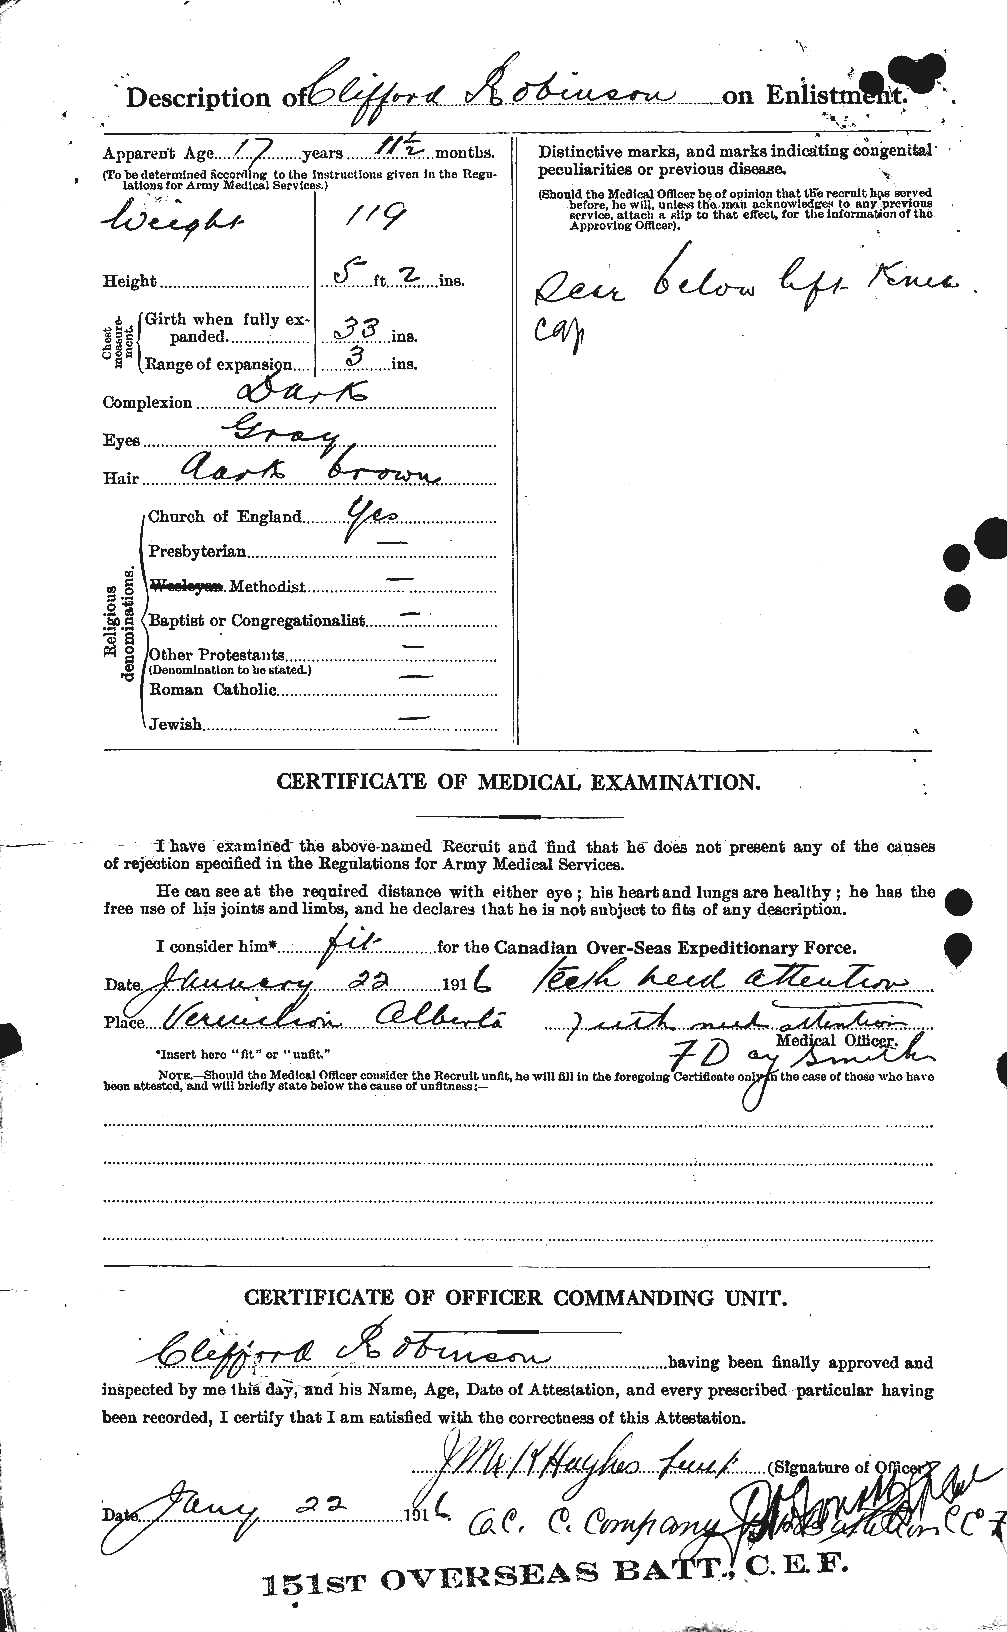 Personnel Records of the First World War - CEF 607114b